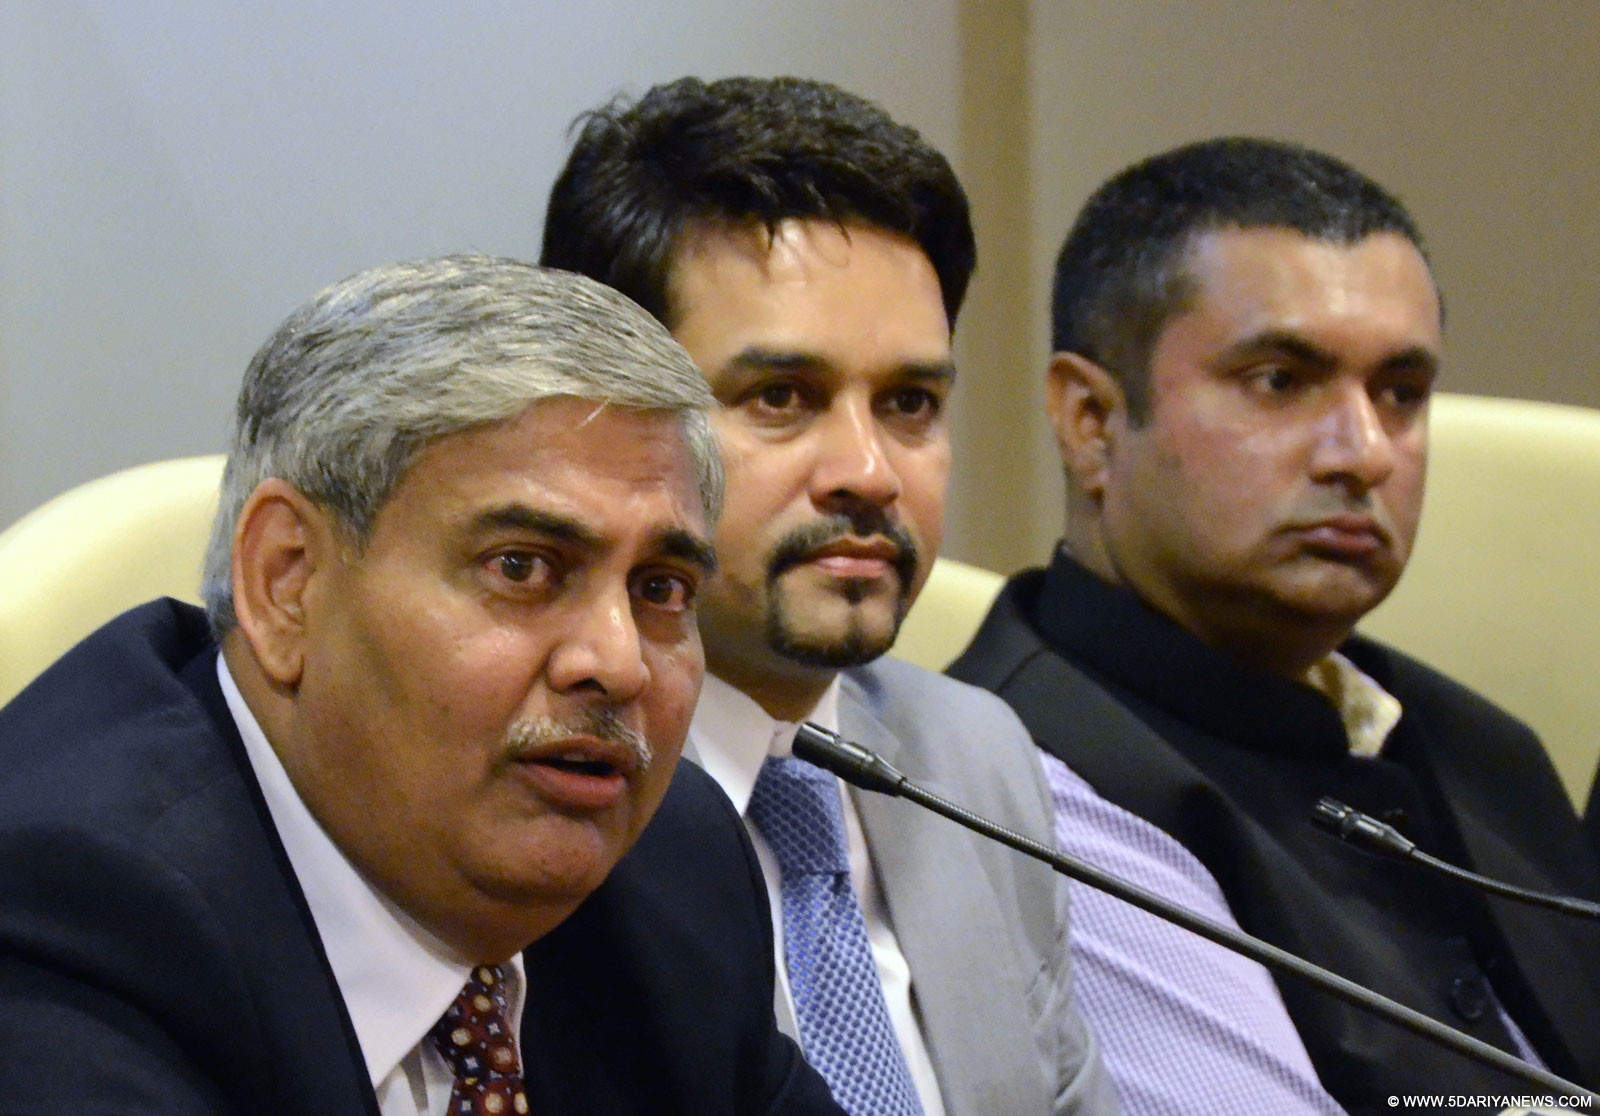 BCCI secretary Anurag Thakur and Shashank Manohar during the Special General Meeting (SGM) of the Board of Control for Cricket in India (BCCI) where later was elected the new president of the board in Mumbai, on Oct 4, 2015.